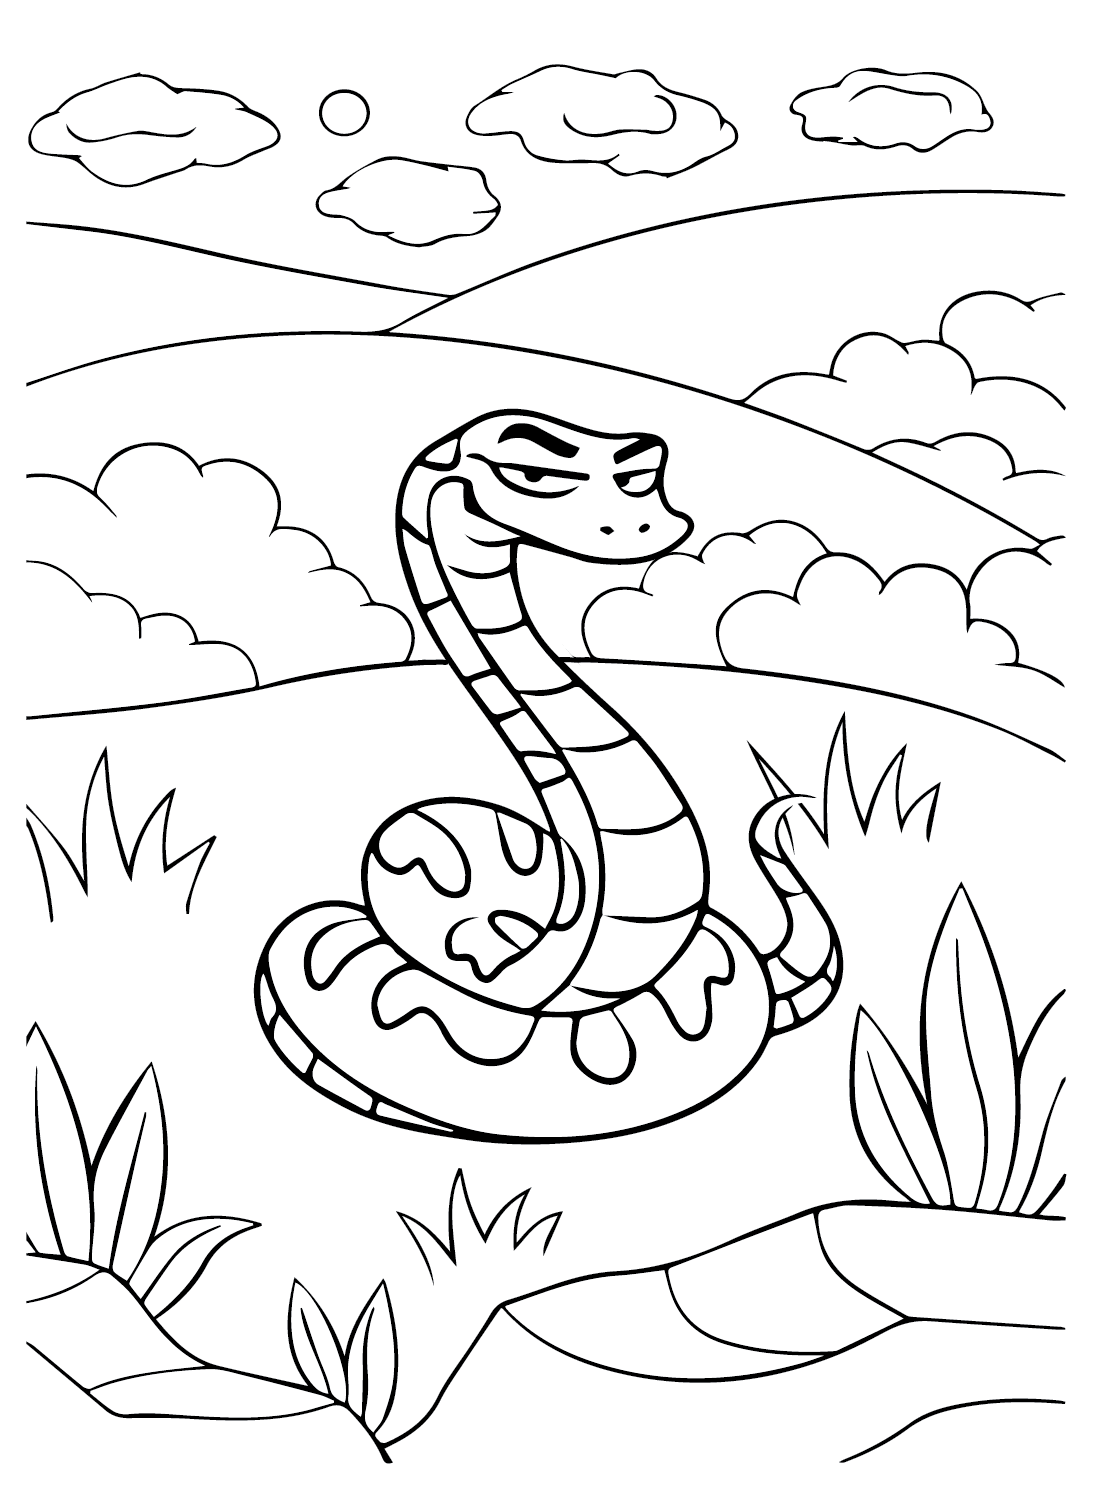 Anaconda Coloring Pages - Coloring Pages For Kids And Adults